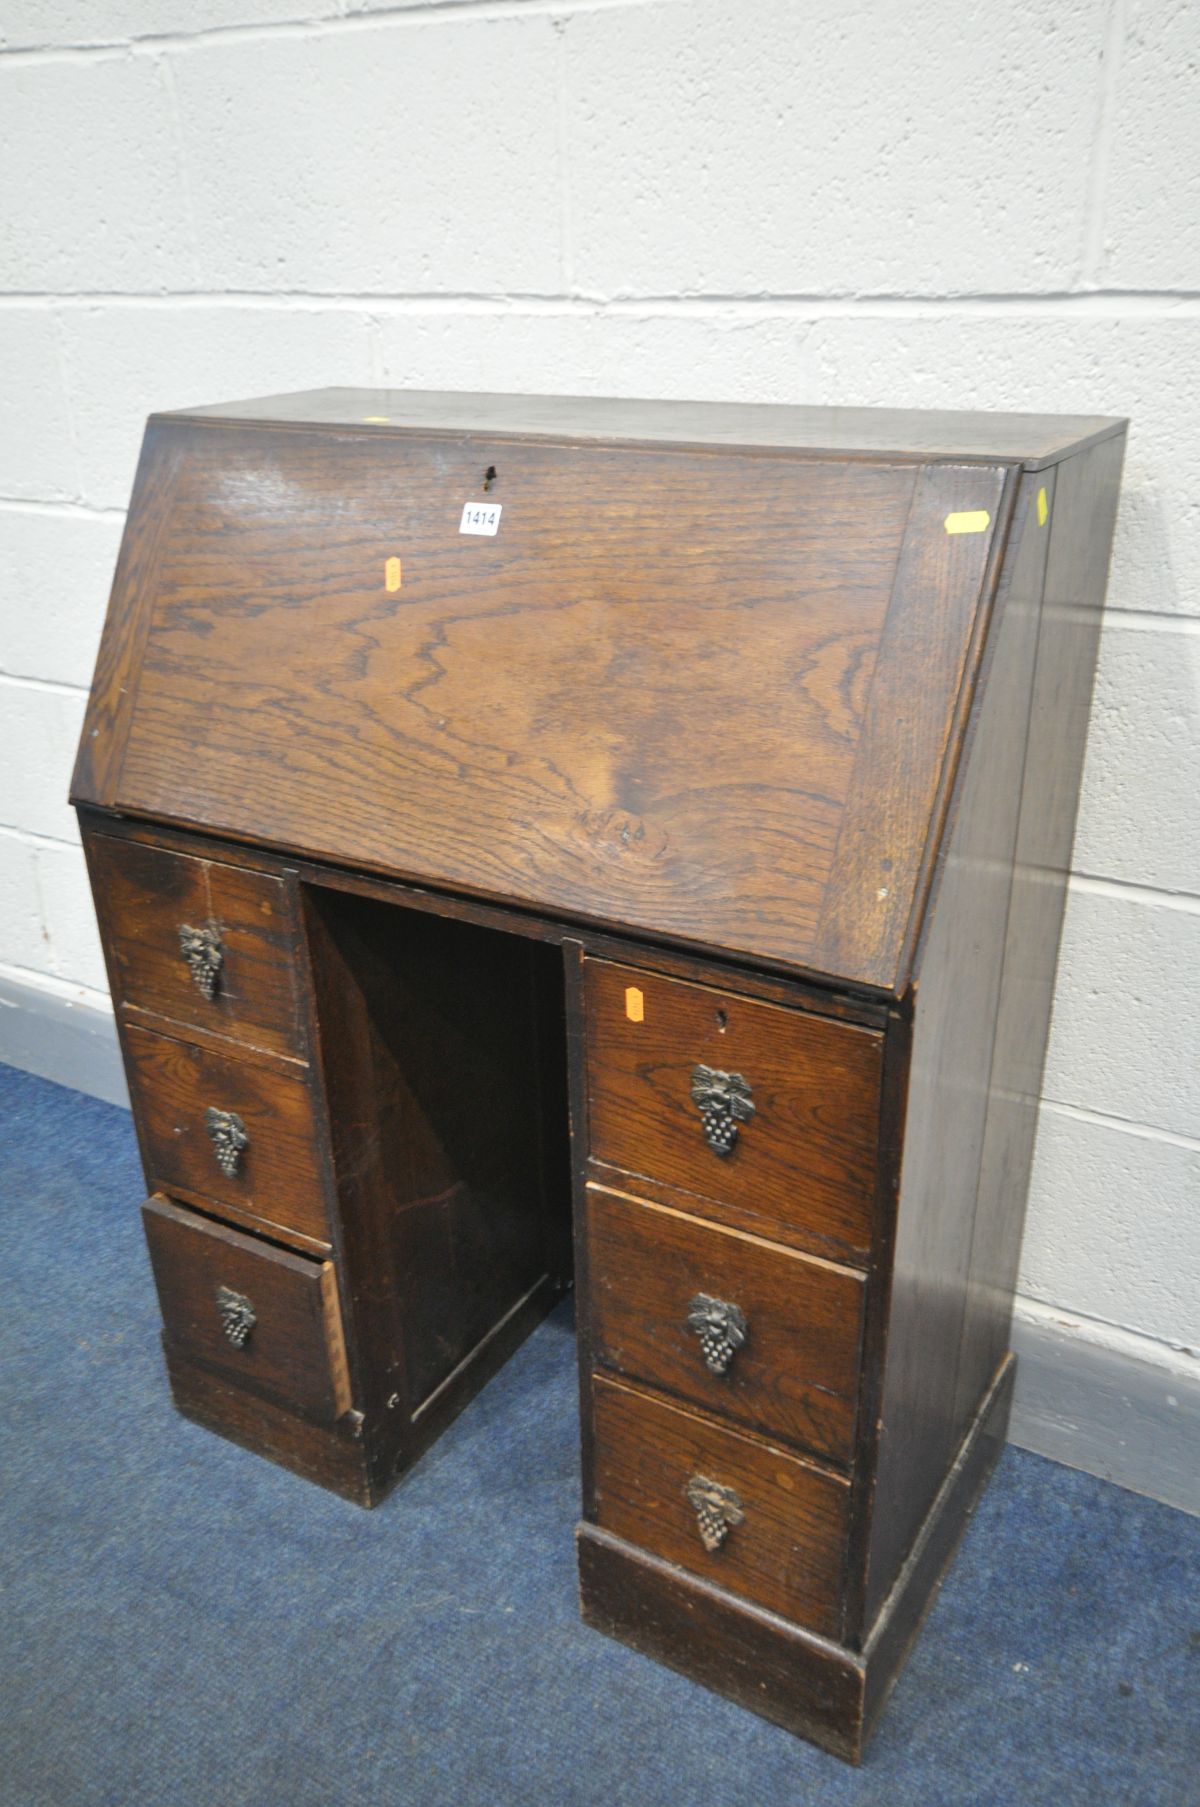 AN EARLY 20TH CENTURY OAK SLIM LADIES BUREAU, fall front door enclosing a fitted interior, with